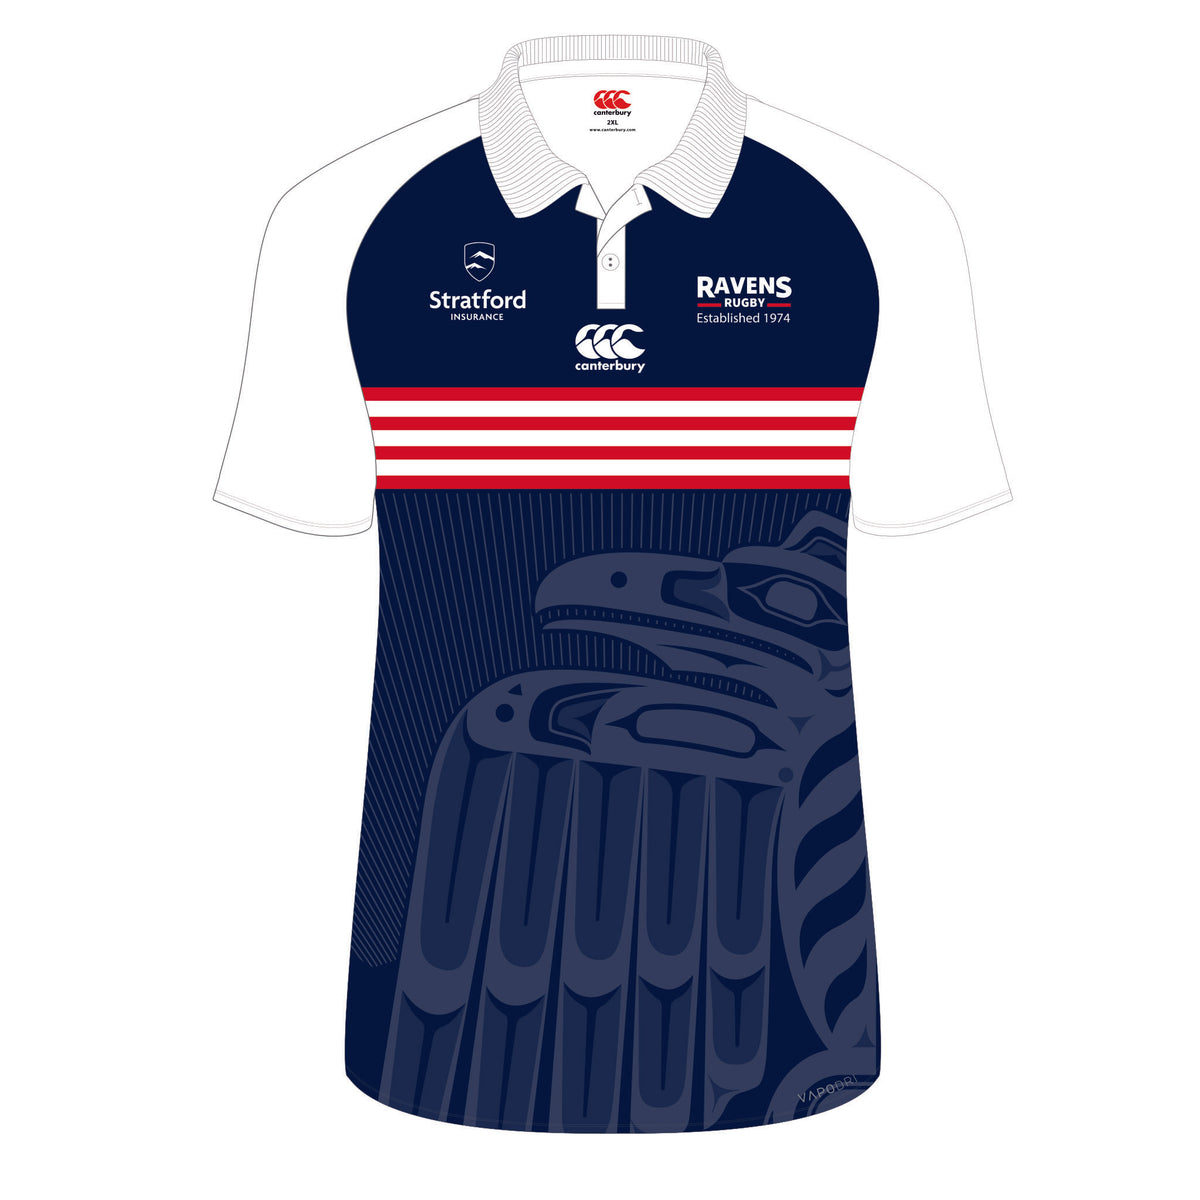 UBCOB Ravens 50th Year Anniversary Performance Polo - Adult Unisex Sizing XS-4XL - Navy/White/Red